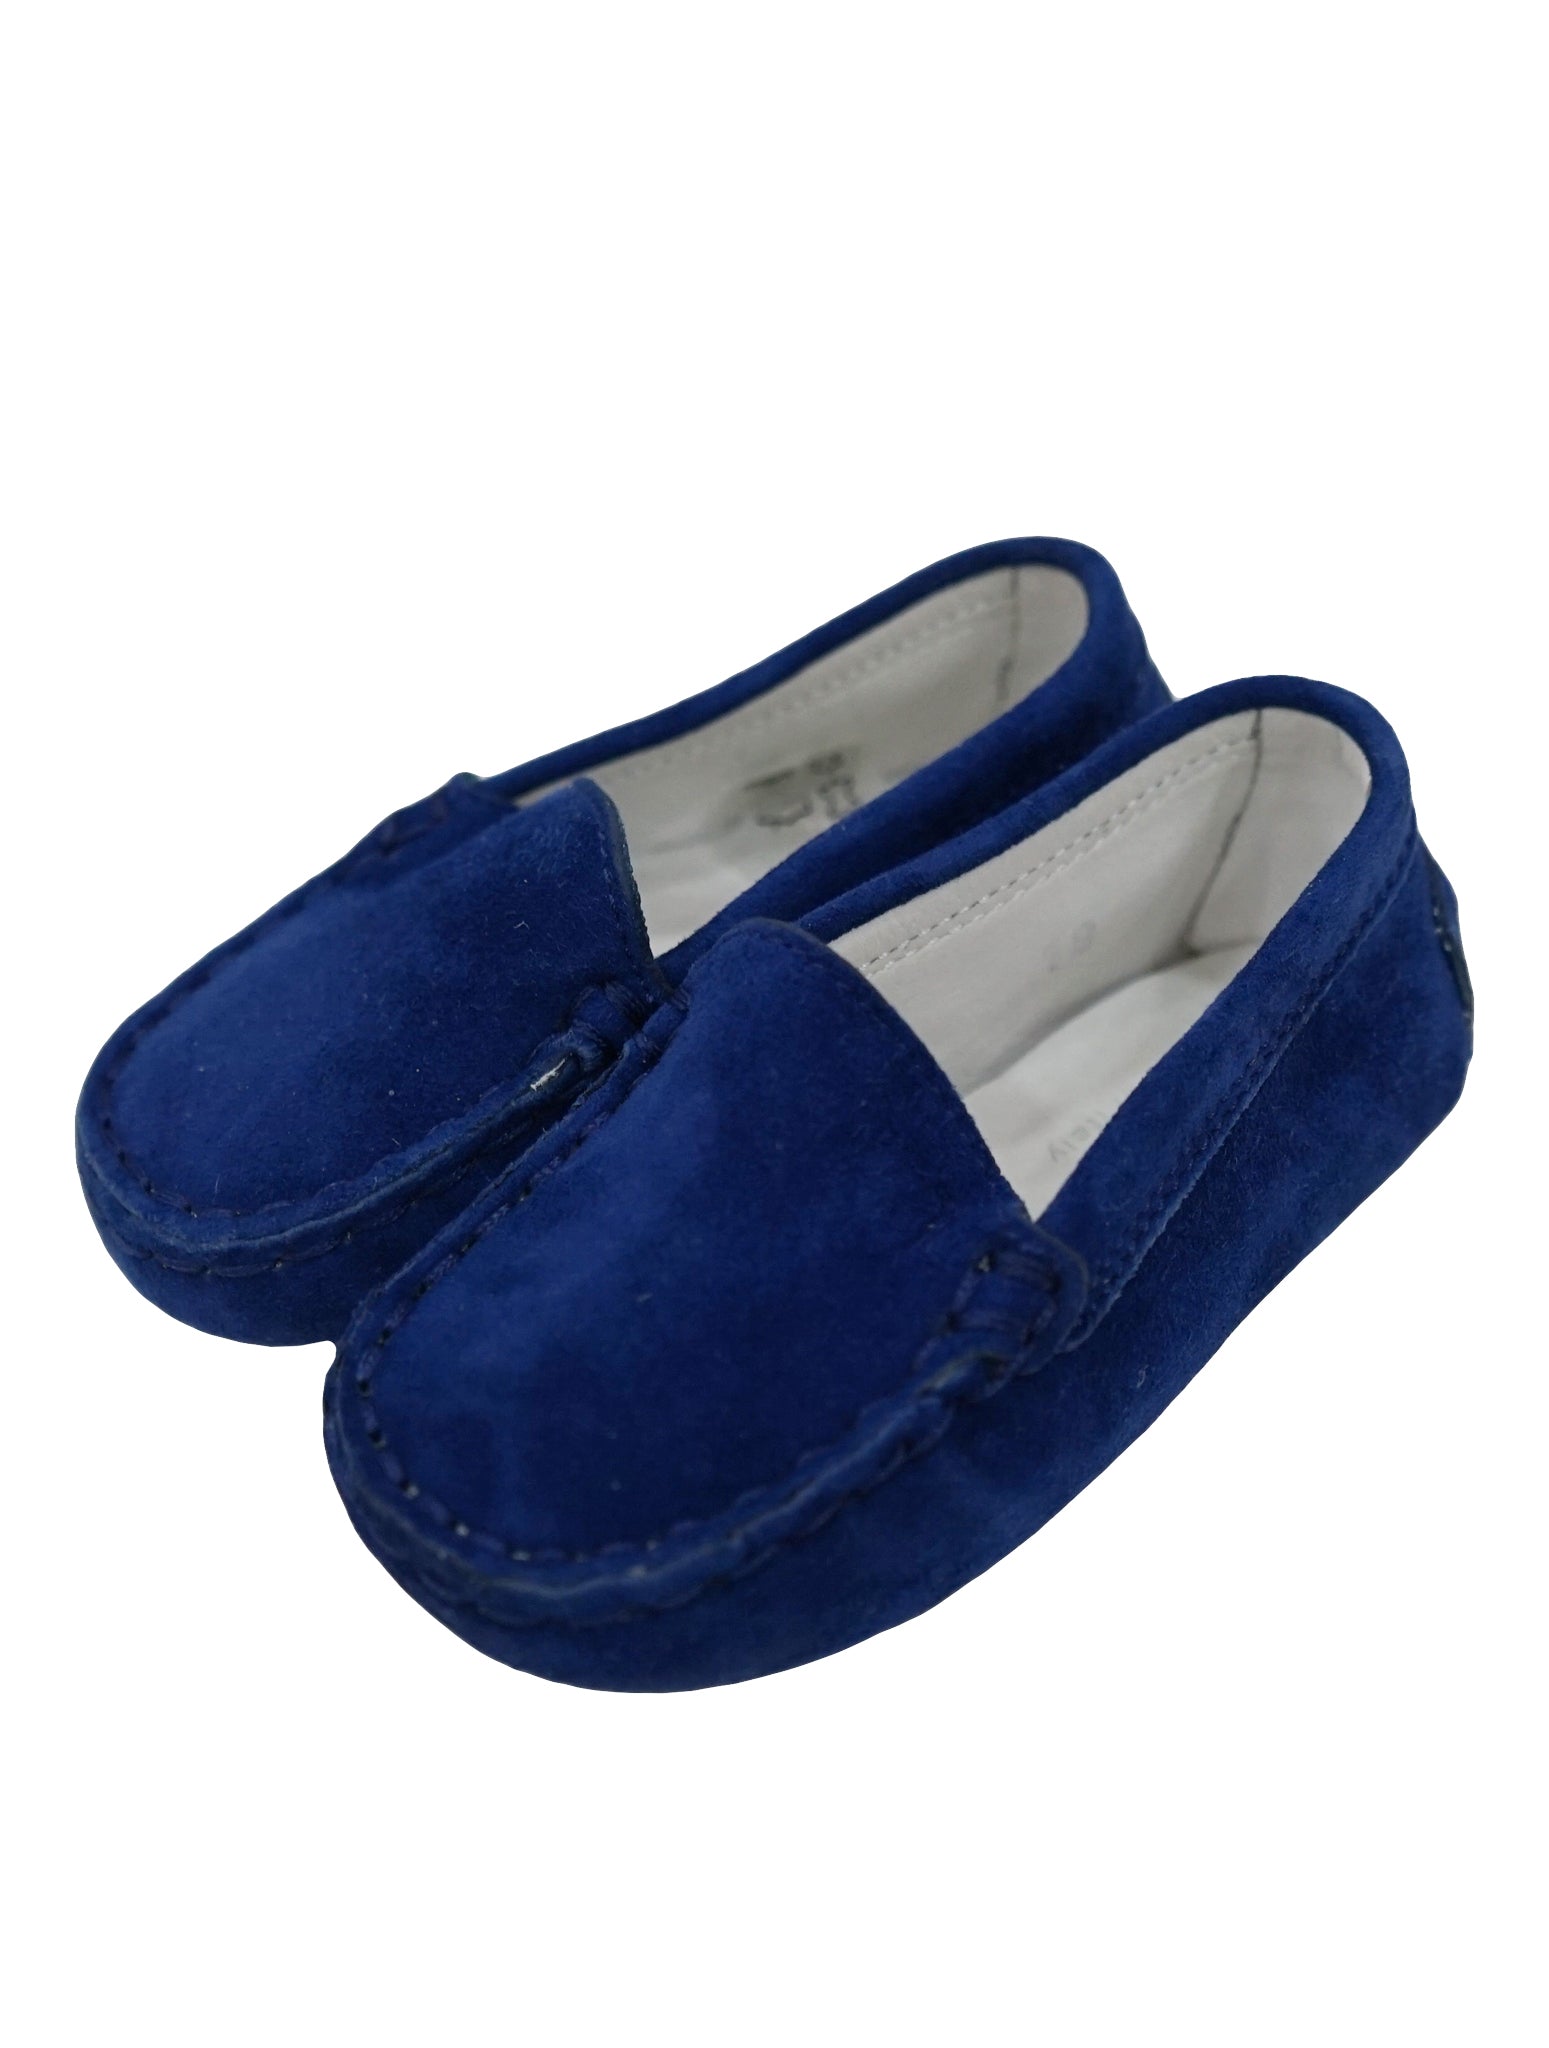 TOD'S BABY BOY SUEDE MOCCASIN SHOES 